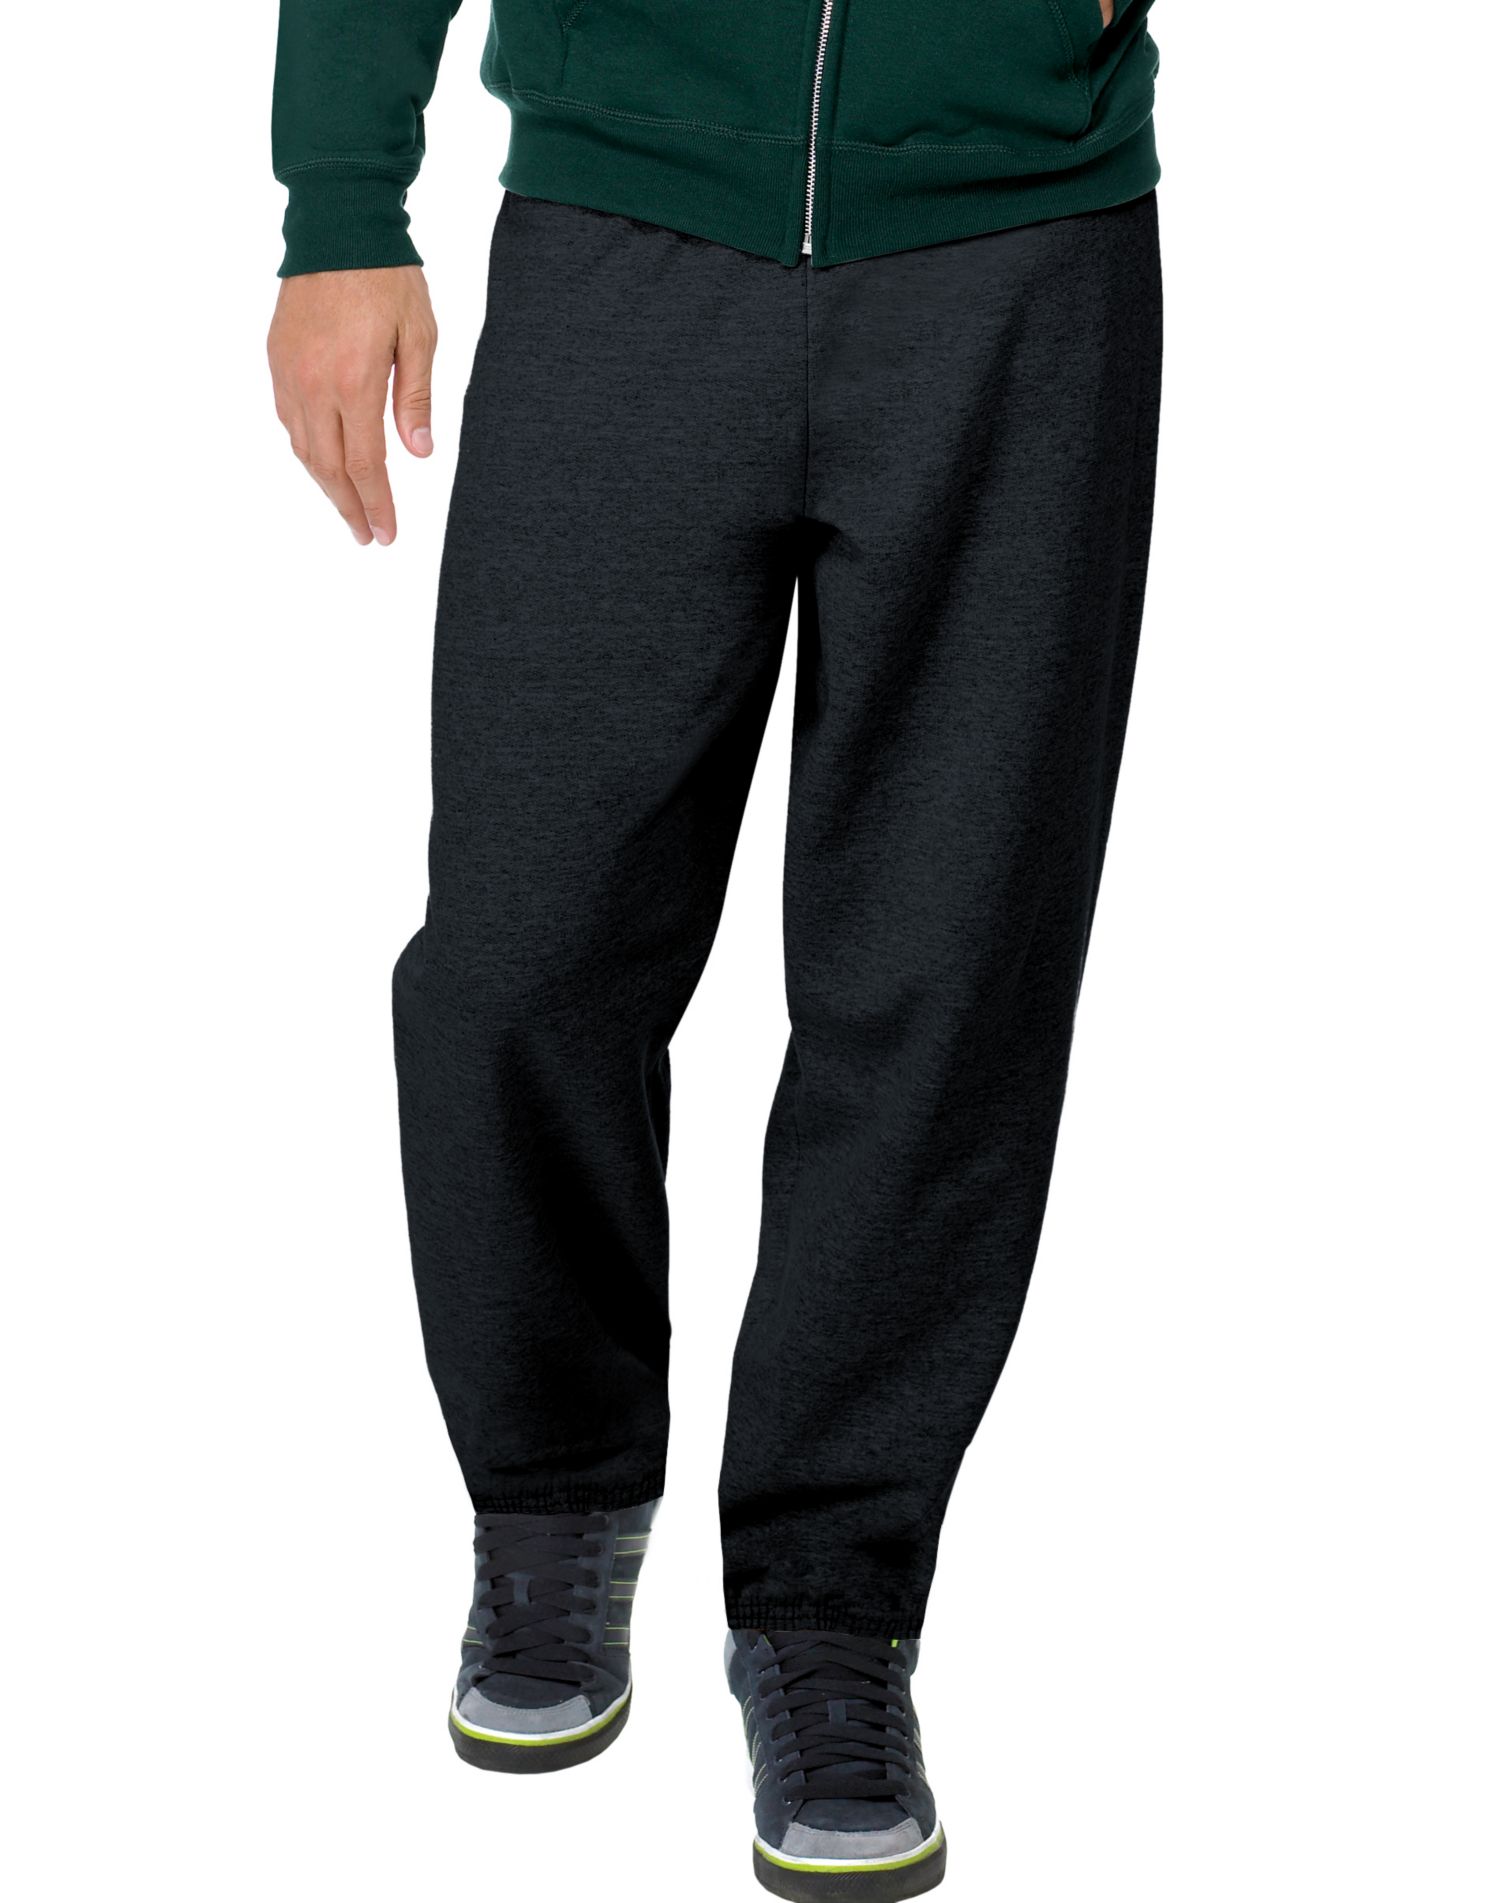 Hanes MenS Cotton Lounge Pant in Vadodara at best price by Uniform World  Wide - Justdial